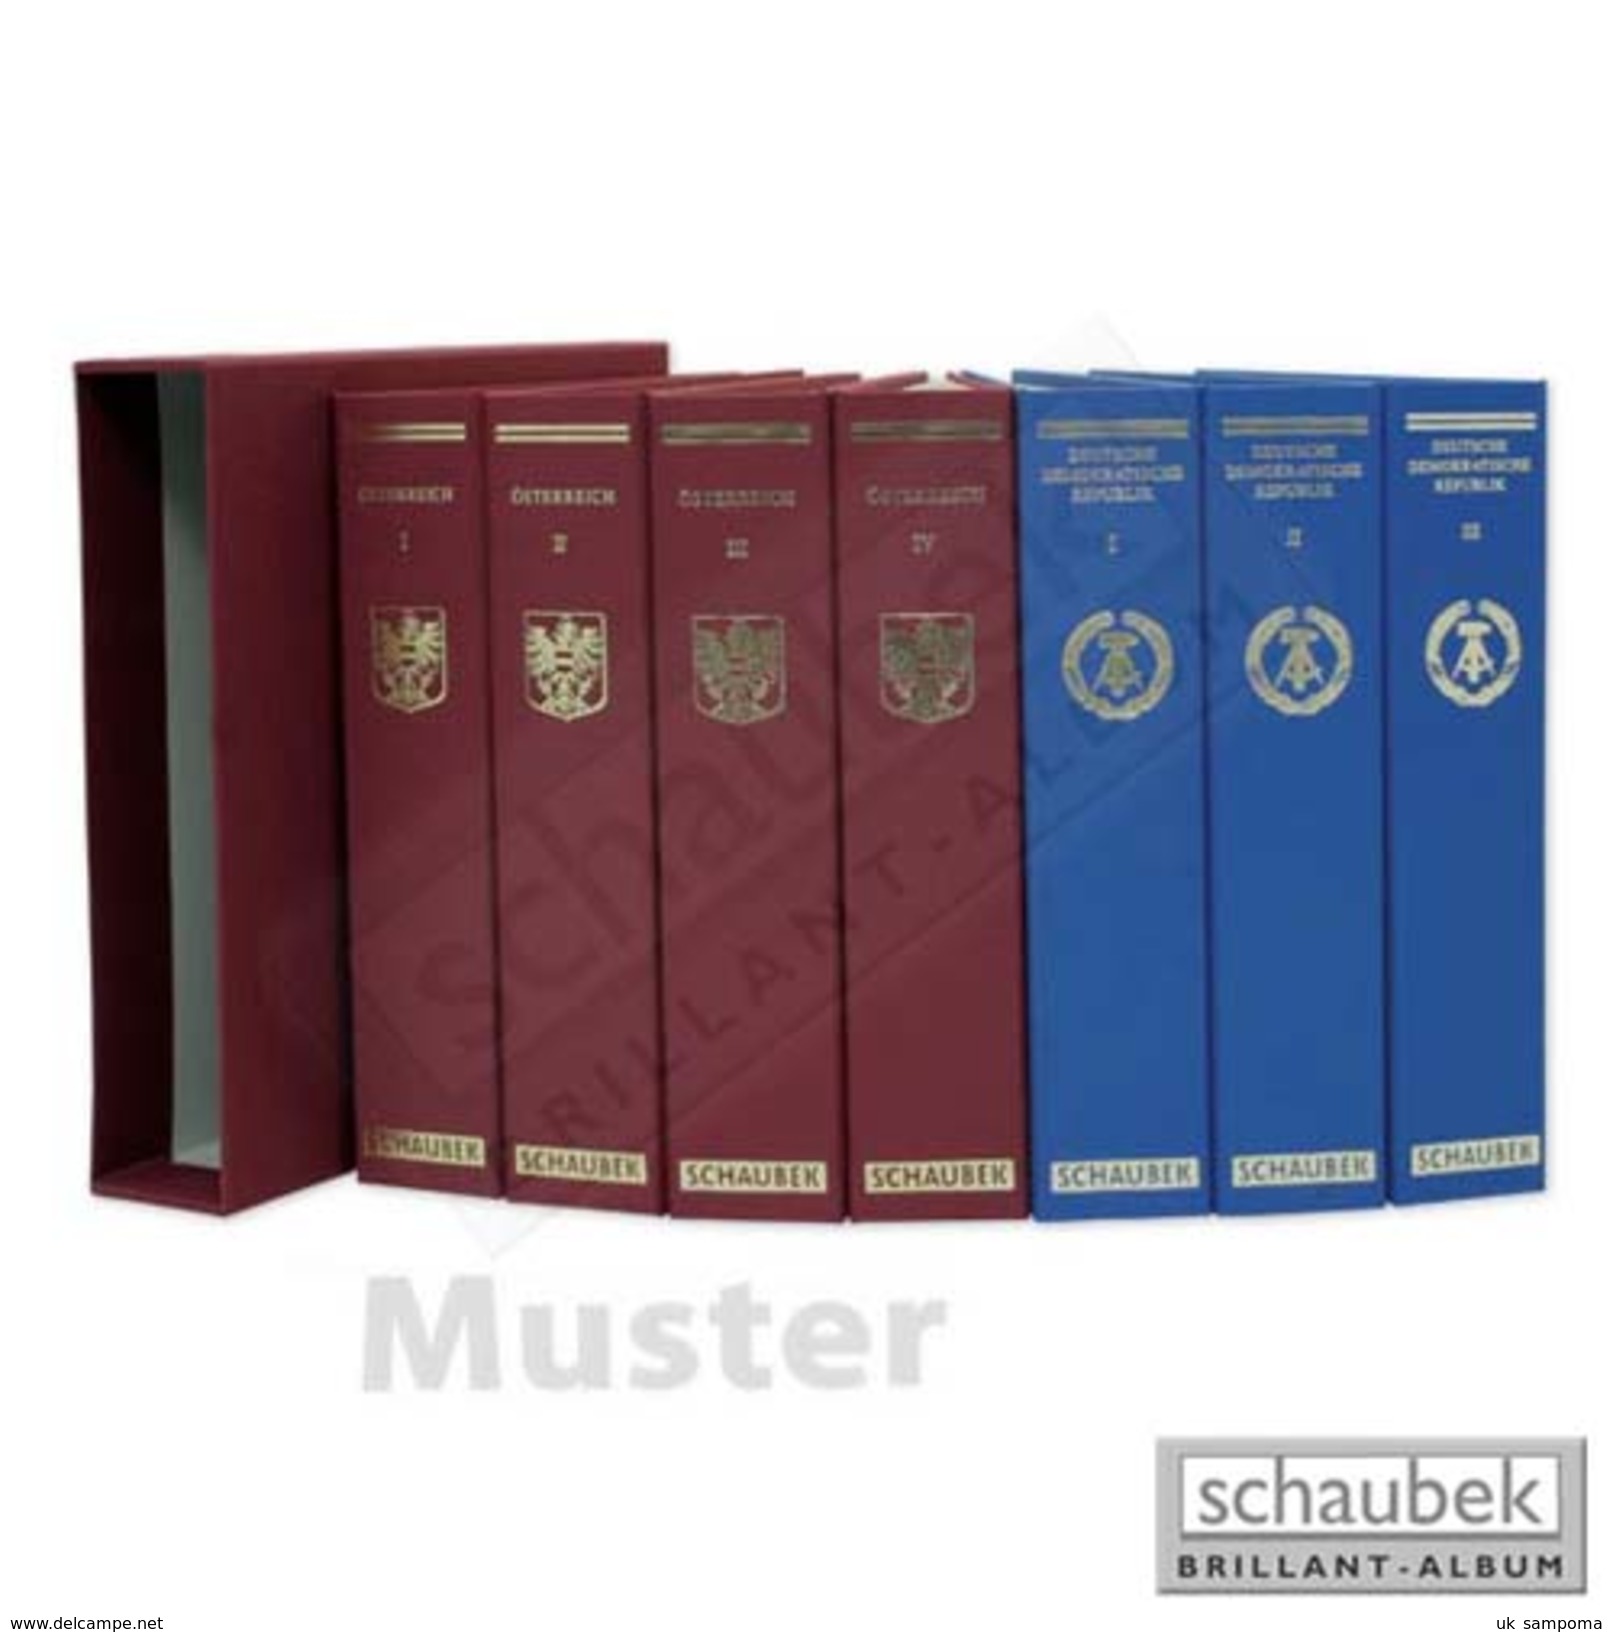 Schaubek A-904/03N Album Netherlands Antilles 2005-2010 Standard, In A Blue Screw Post Binder, Vol. III, Without Slipcas - Binders With Pages